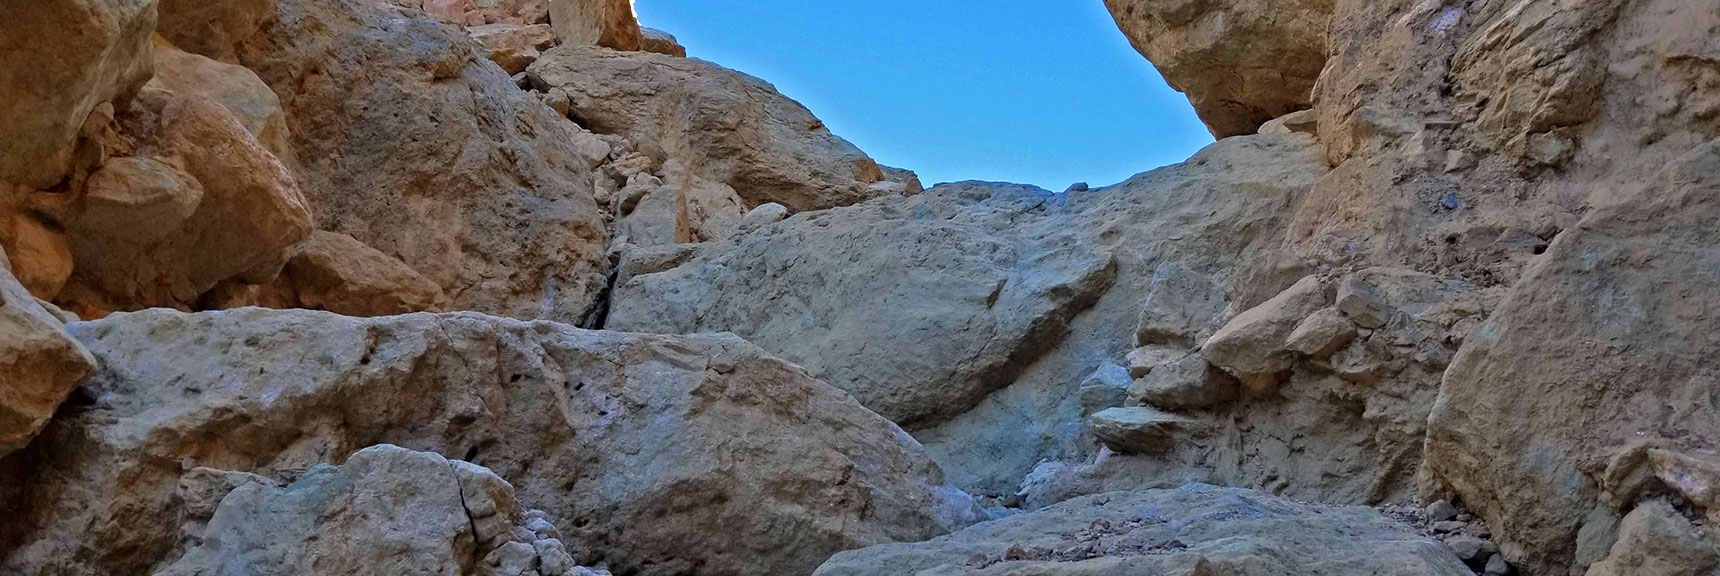 Closer Look at the High Rockfall. Possible but Challenging to Navigate for this Non-Climber! | Artists Drive Hidden Canyon Hikes | Death Valley National Park, California